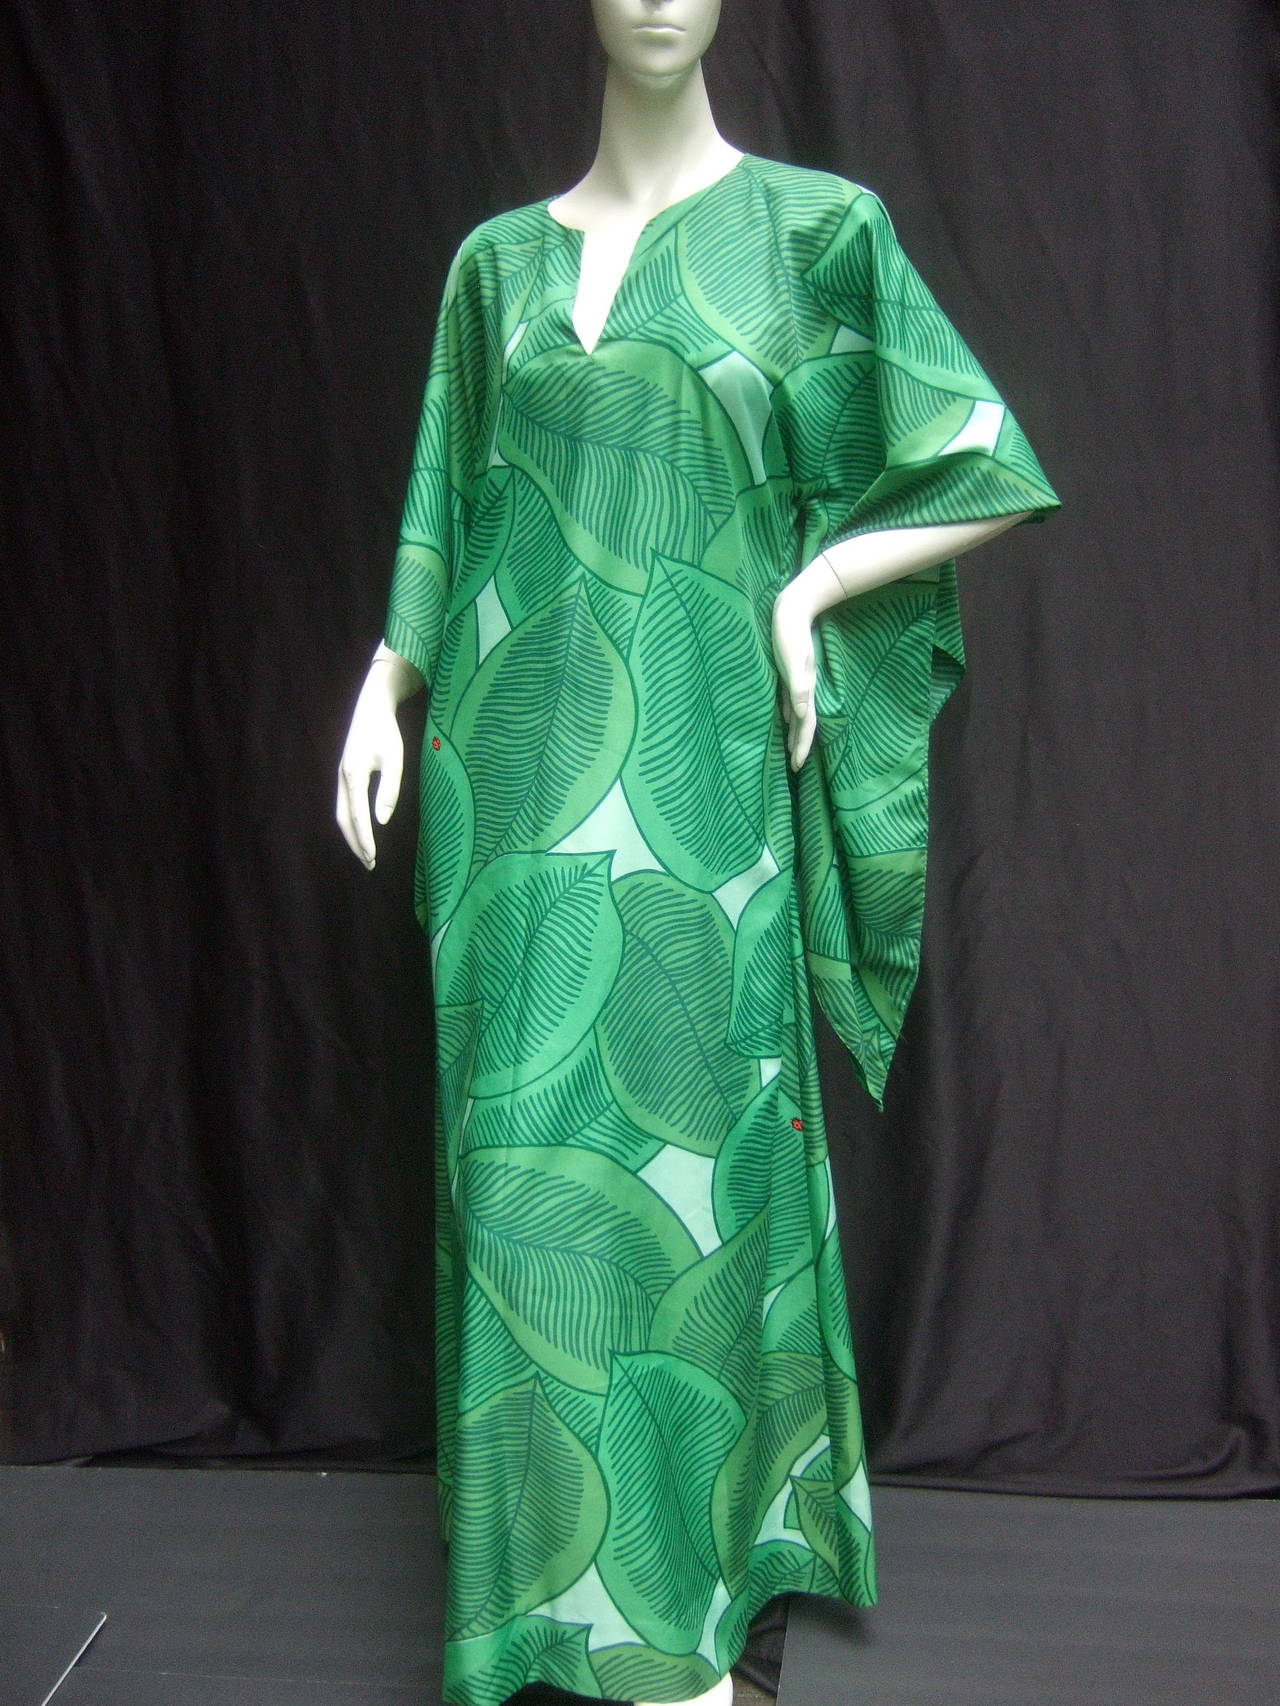 Lush green tropical print caftan gown c 1970
The unique gown is illustrated with vibrant 
green foliage accented with a few tiny 
restrained lady bugs 

The chic caftan is designed with dramatic 
butterfly wing sleeves. The neckline has
a